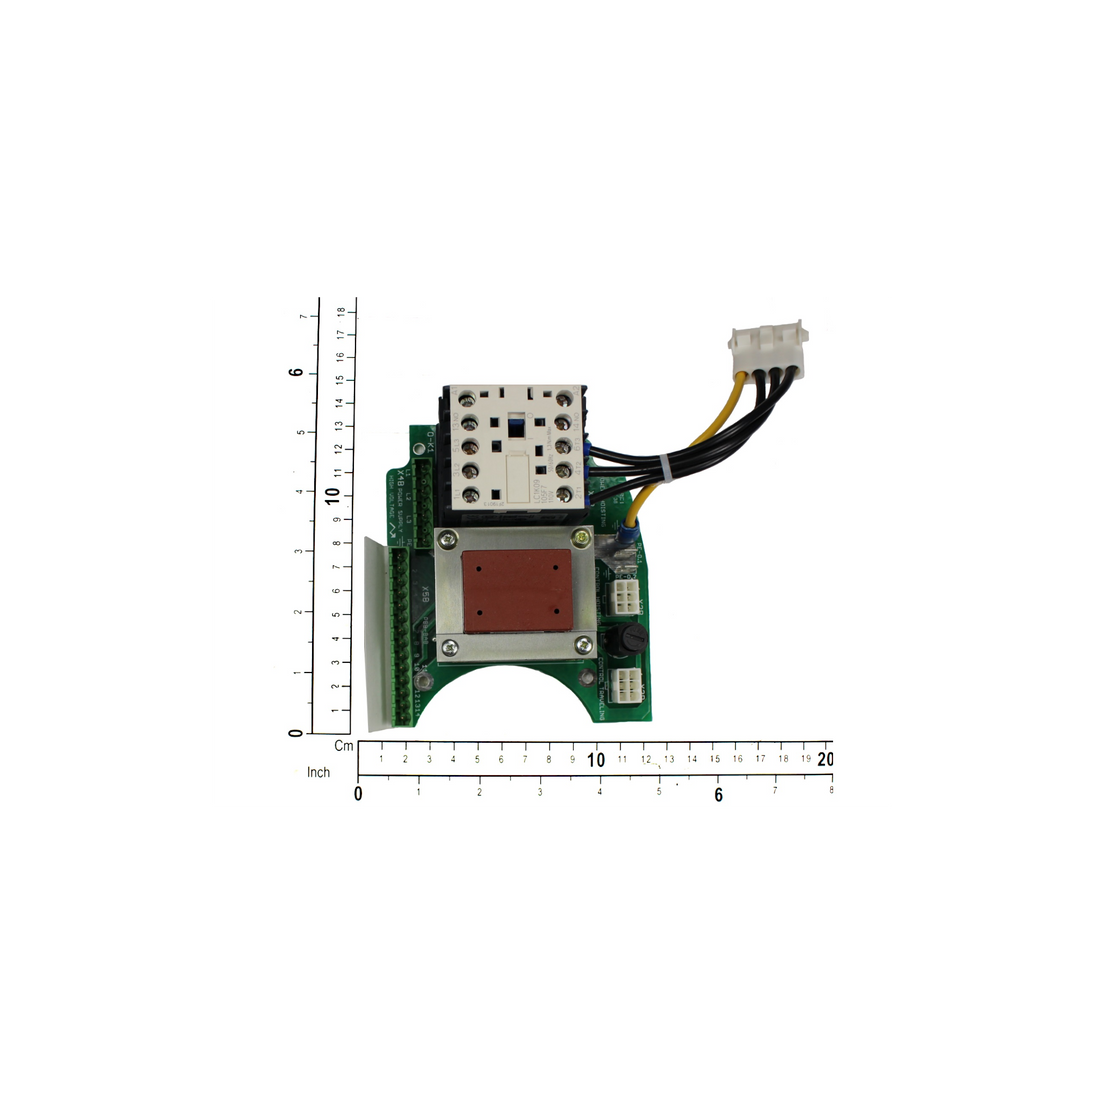 R&M Parts - Power Supply Board, Part Number: 3000006513